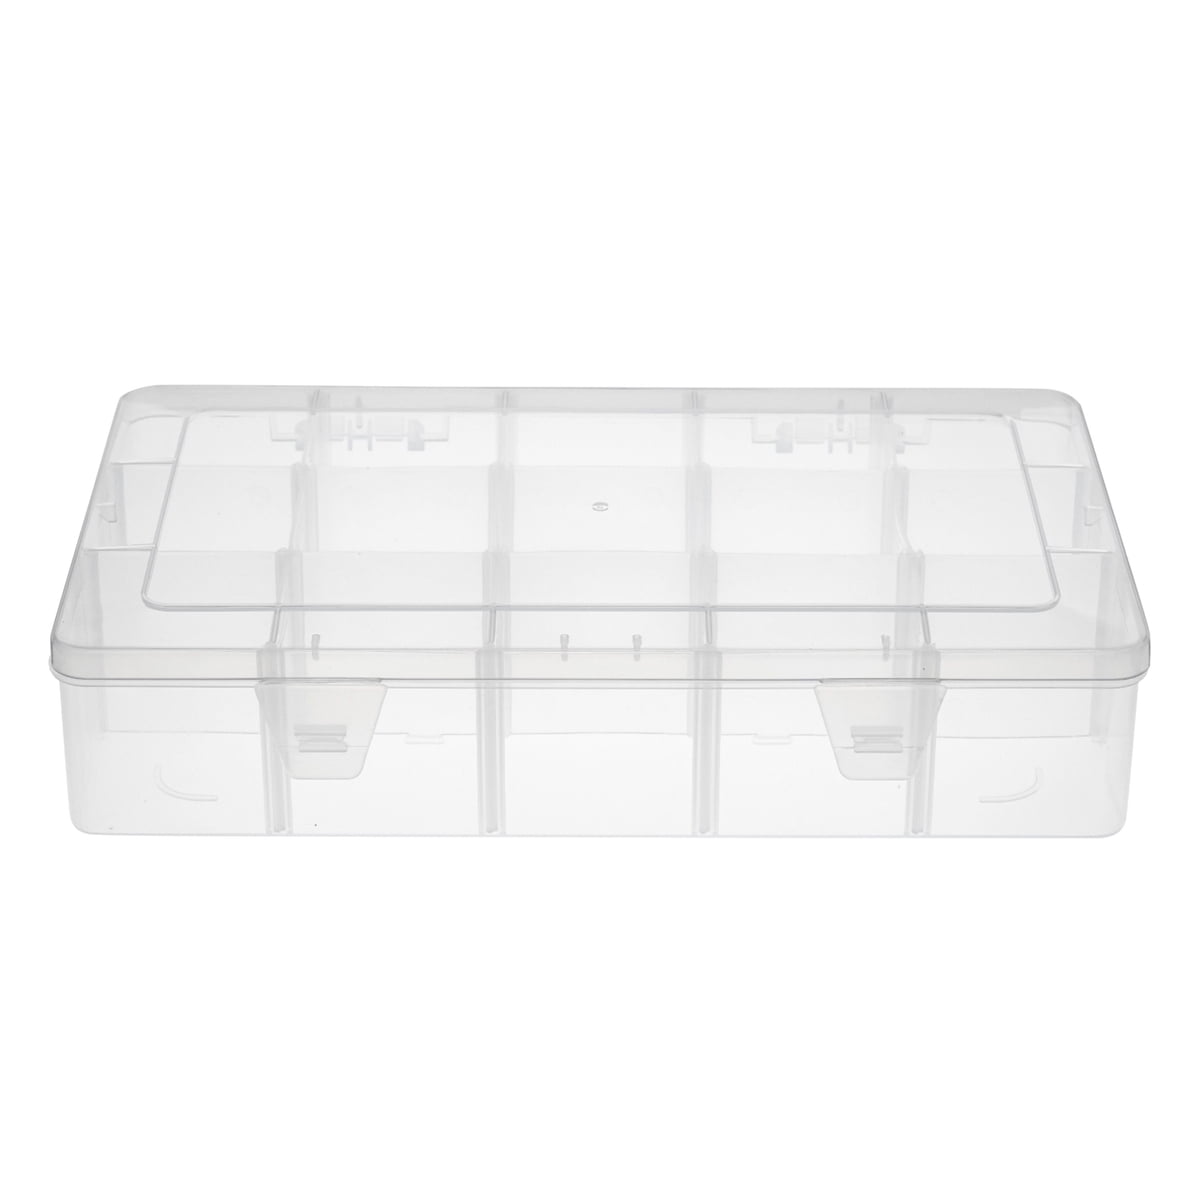  COHEALI 10 Pcs 15 Grid Storage Box Plastic Containers Bead  Organizer Small Clear Container Compartment Storage Container Art Supply  Storage Organizer Craft Storage Dividers Container Abs